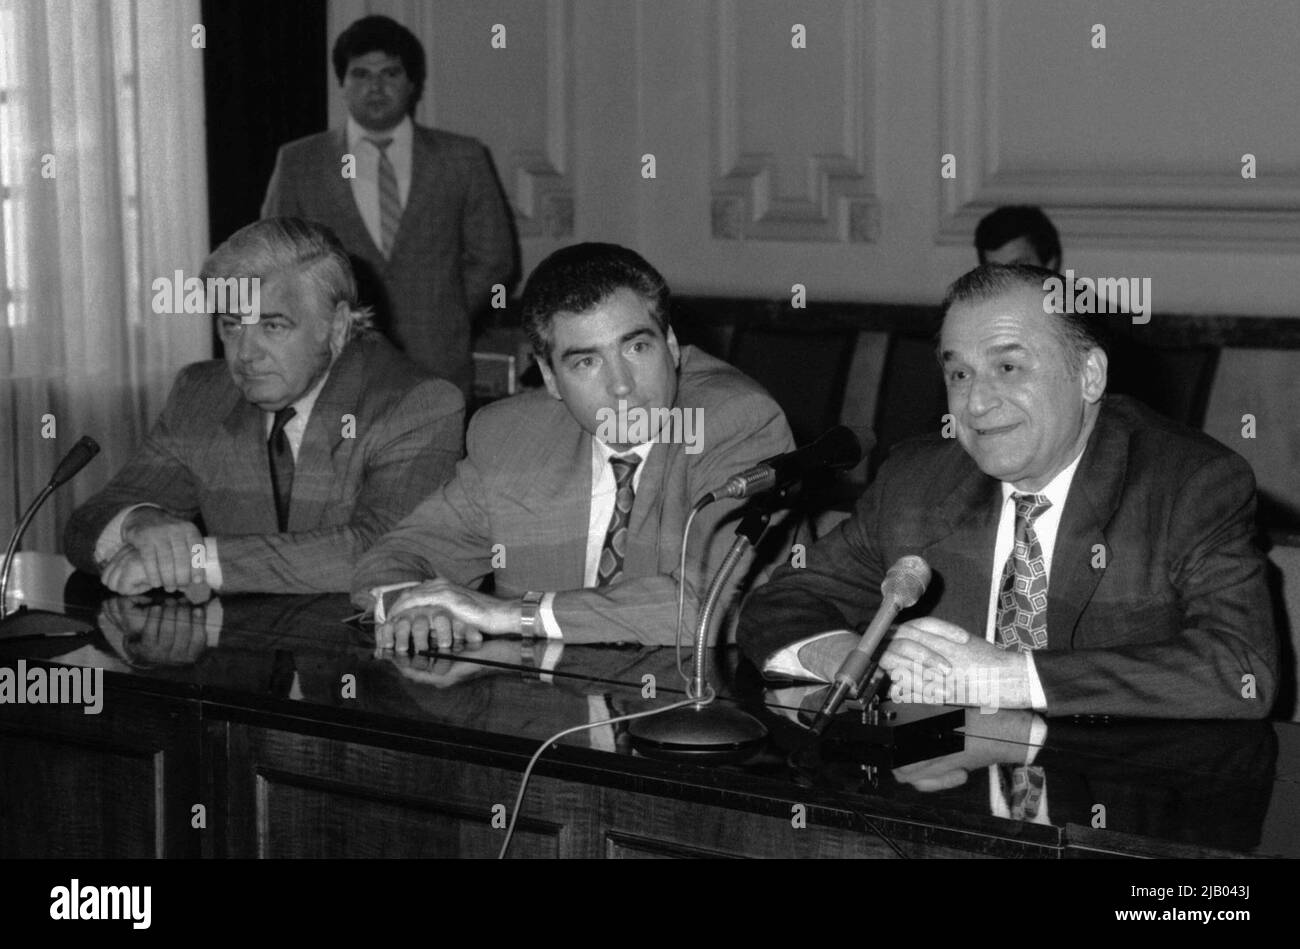 Bucharest, Romania, 1990. The President of the Romanian Football Federation, Mircea Angelescu, with politicians Petre Roman & Ion Iliescu, during a press conference following the qualification of the national football team to the 1990 FIFA World Cup. Stock Photo